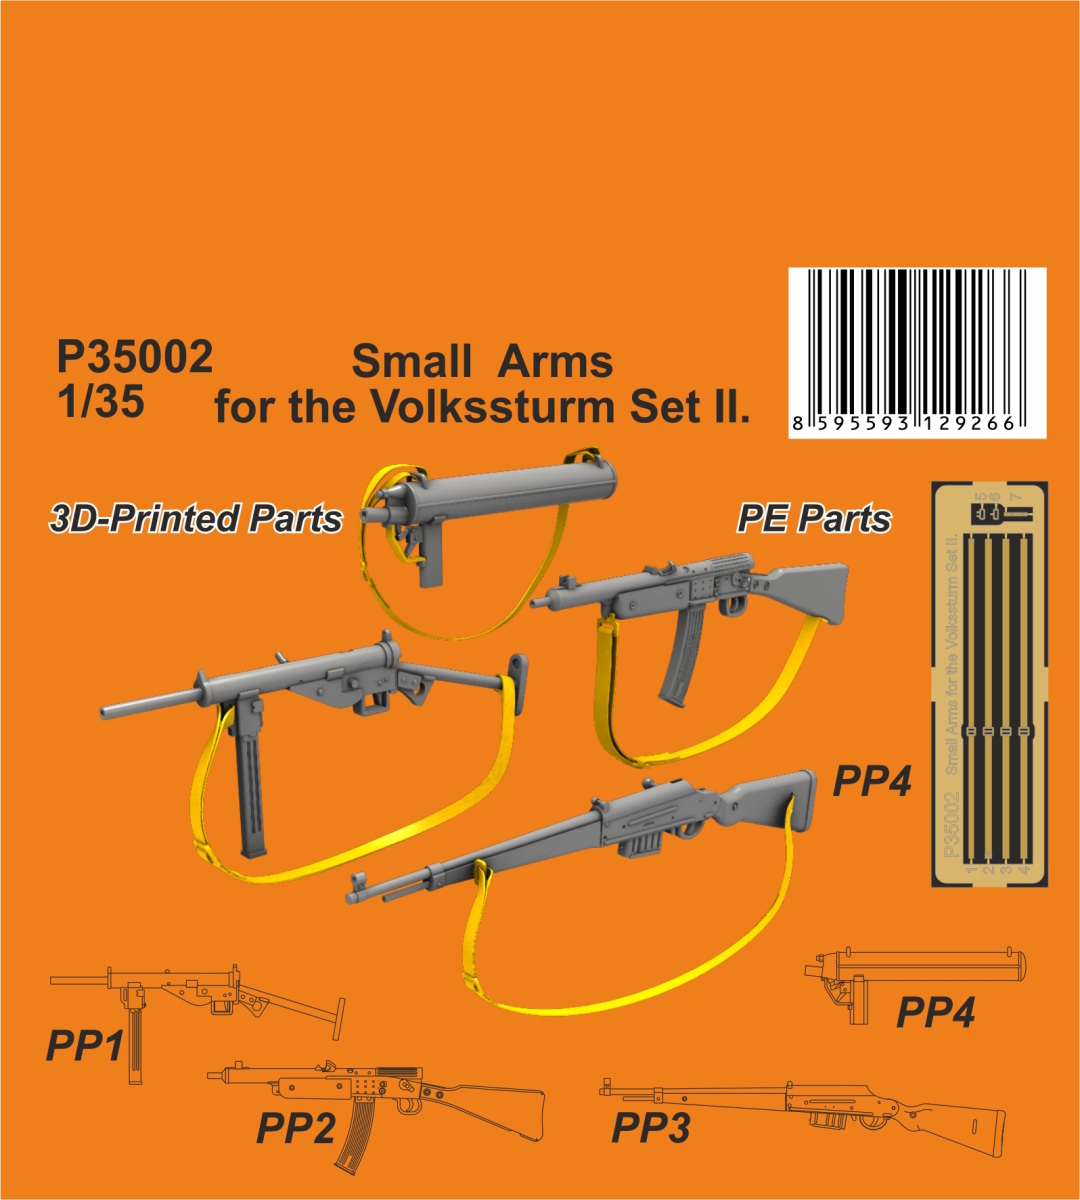 1/35 Small  Arms for the Volkssturm Set II